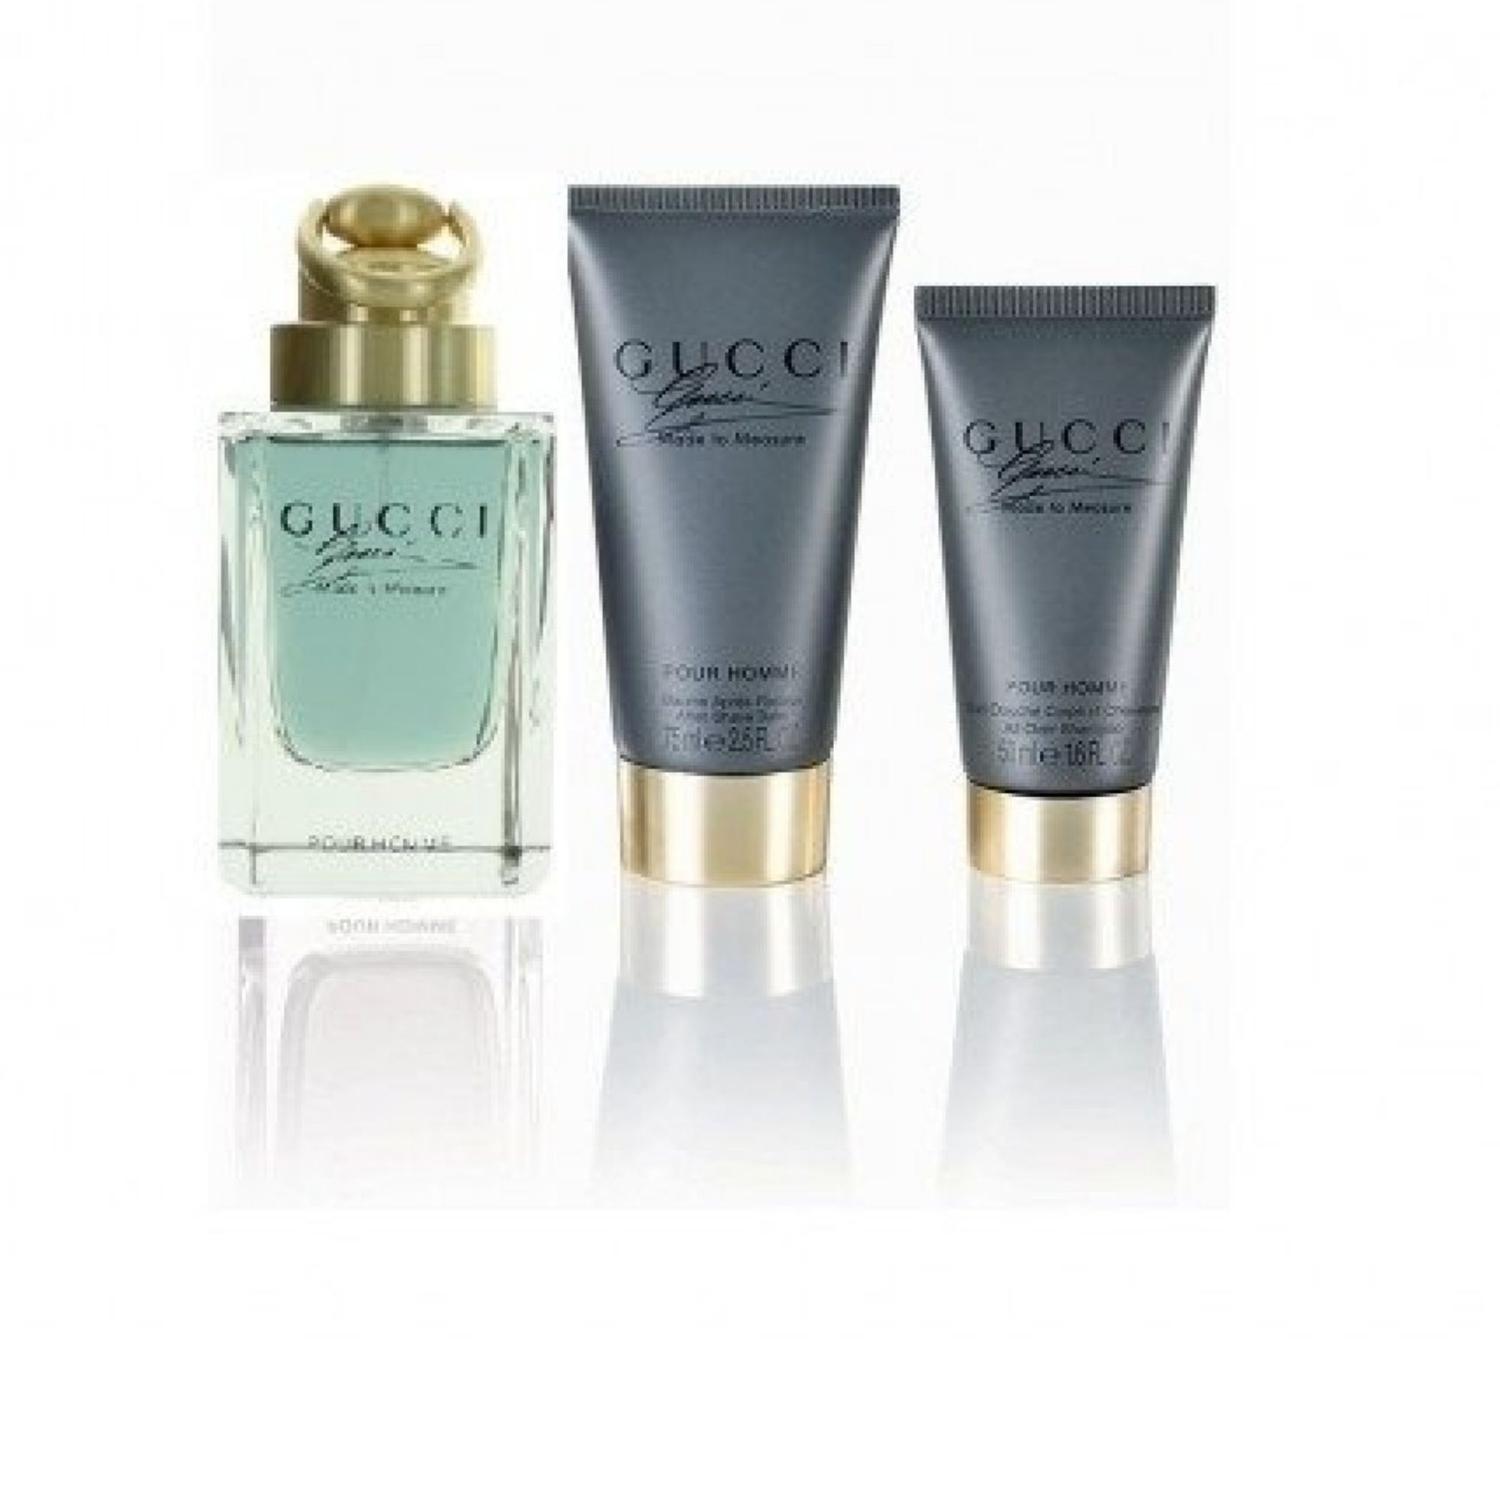 Gucci Gift Set Made to Measure Perfume 90ml EDT + 75ml After Shave + 50 ml Shower Gel by Gucci.